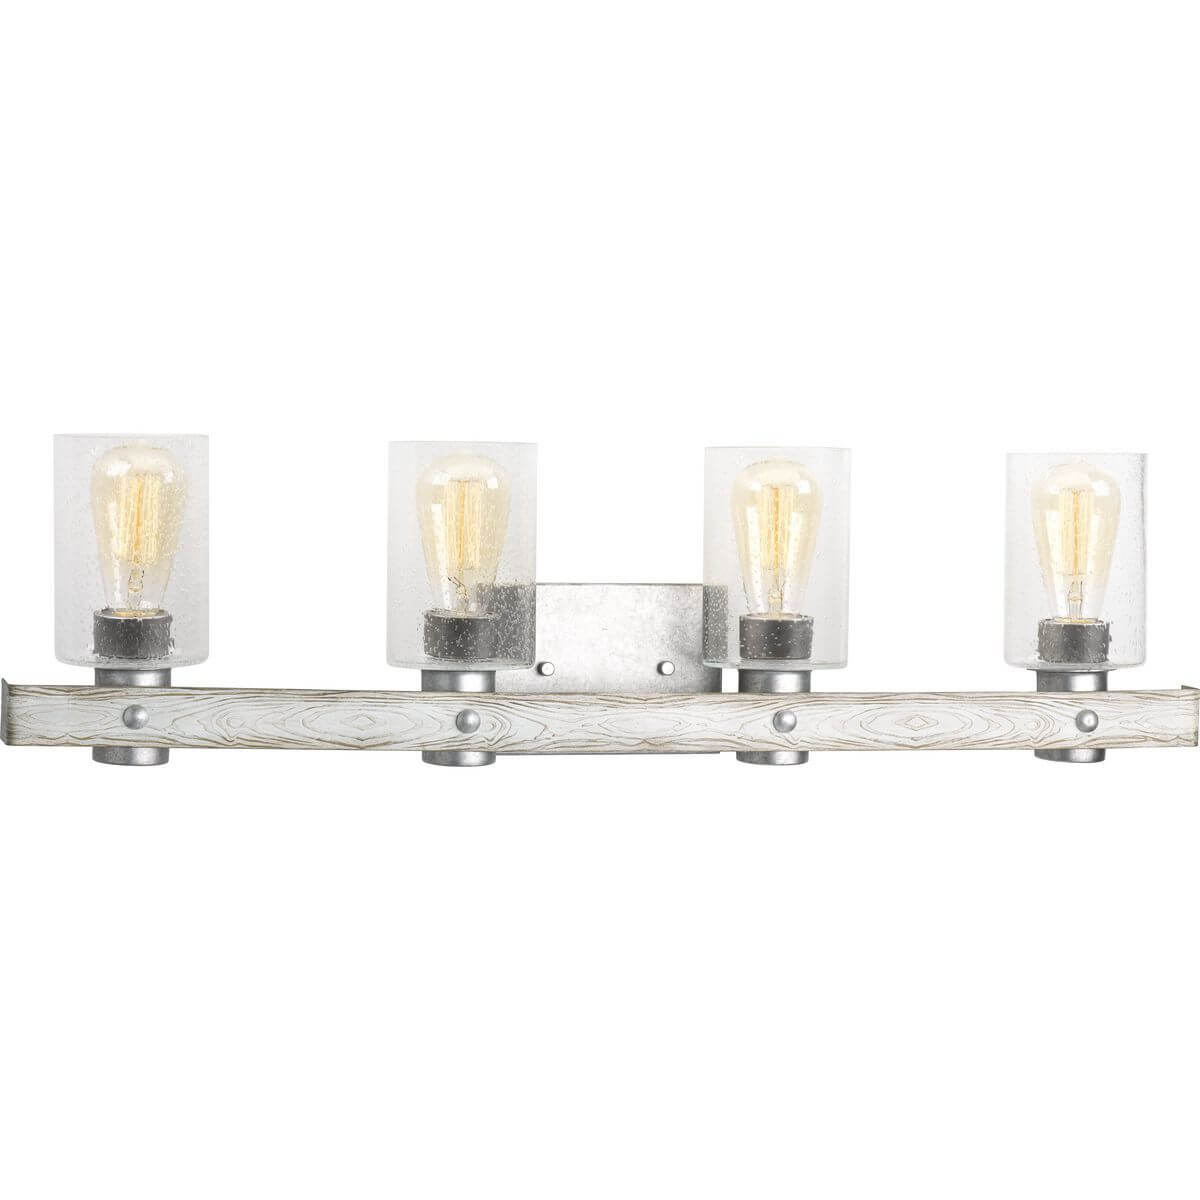 Progress Lighting P300126-141 Gulliver 4 Light 33 inch Bath Vanity Light in Galvanized with Clear Seeded Glass